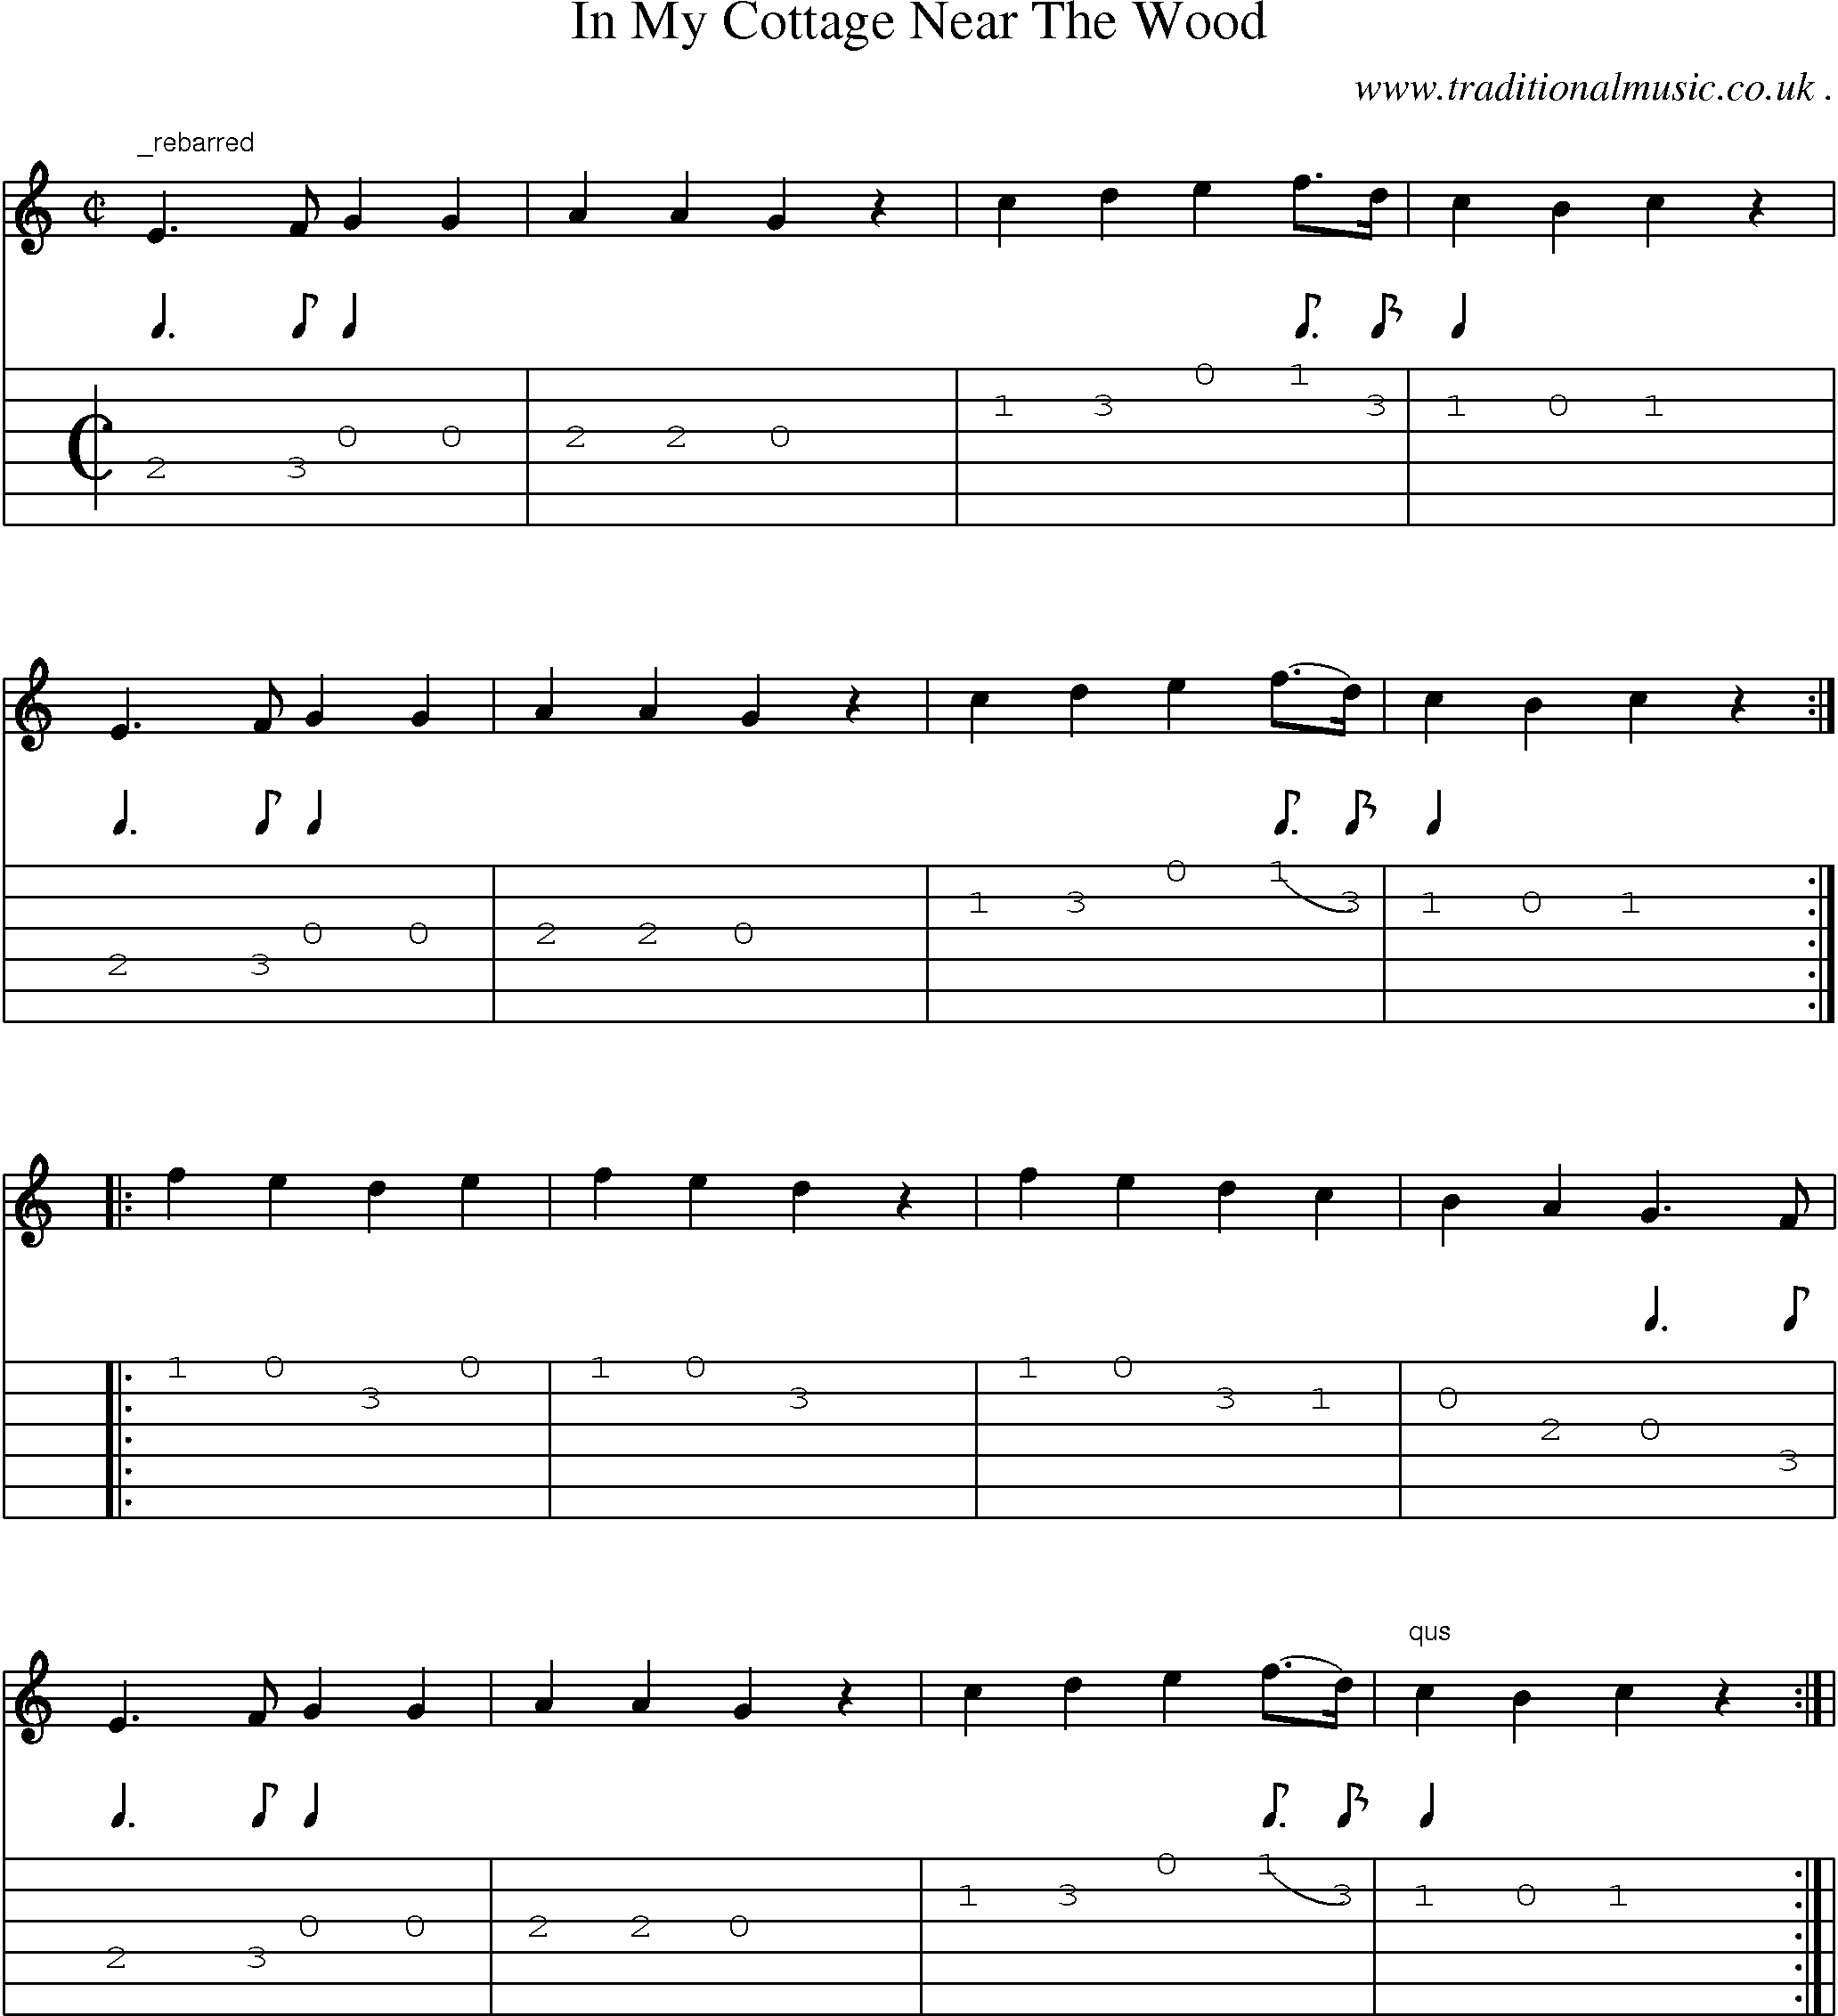 Sheet-Music and Guitar Tabs for In My Cottage Near The Wood